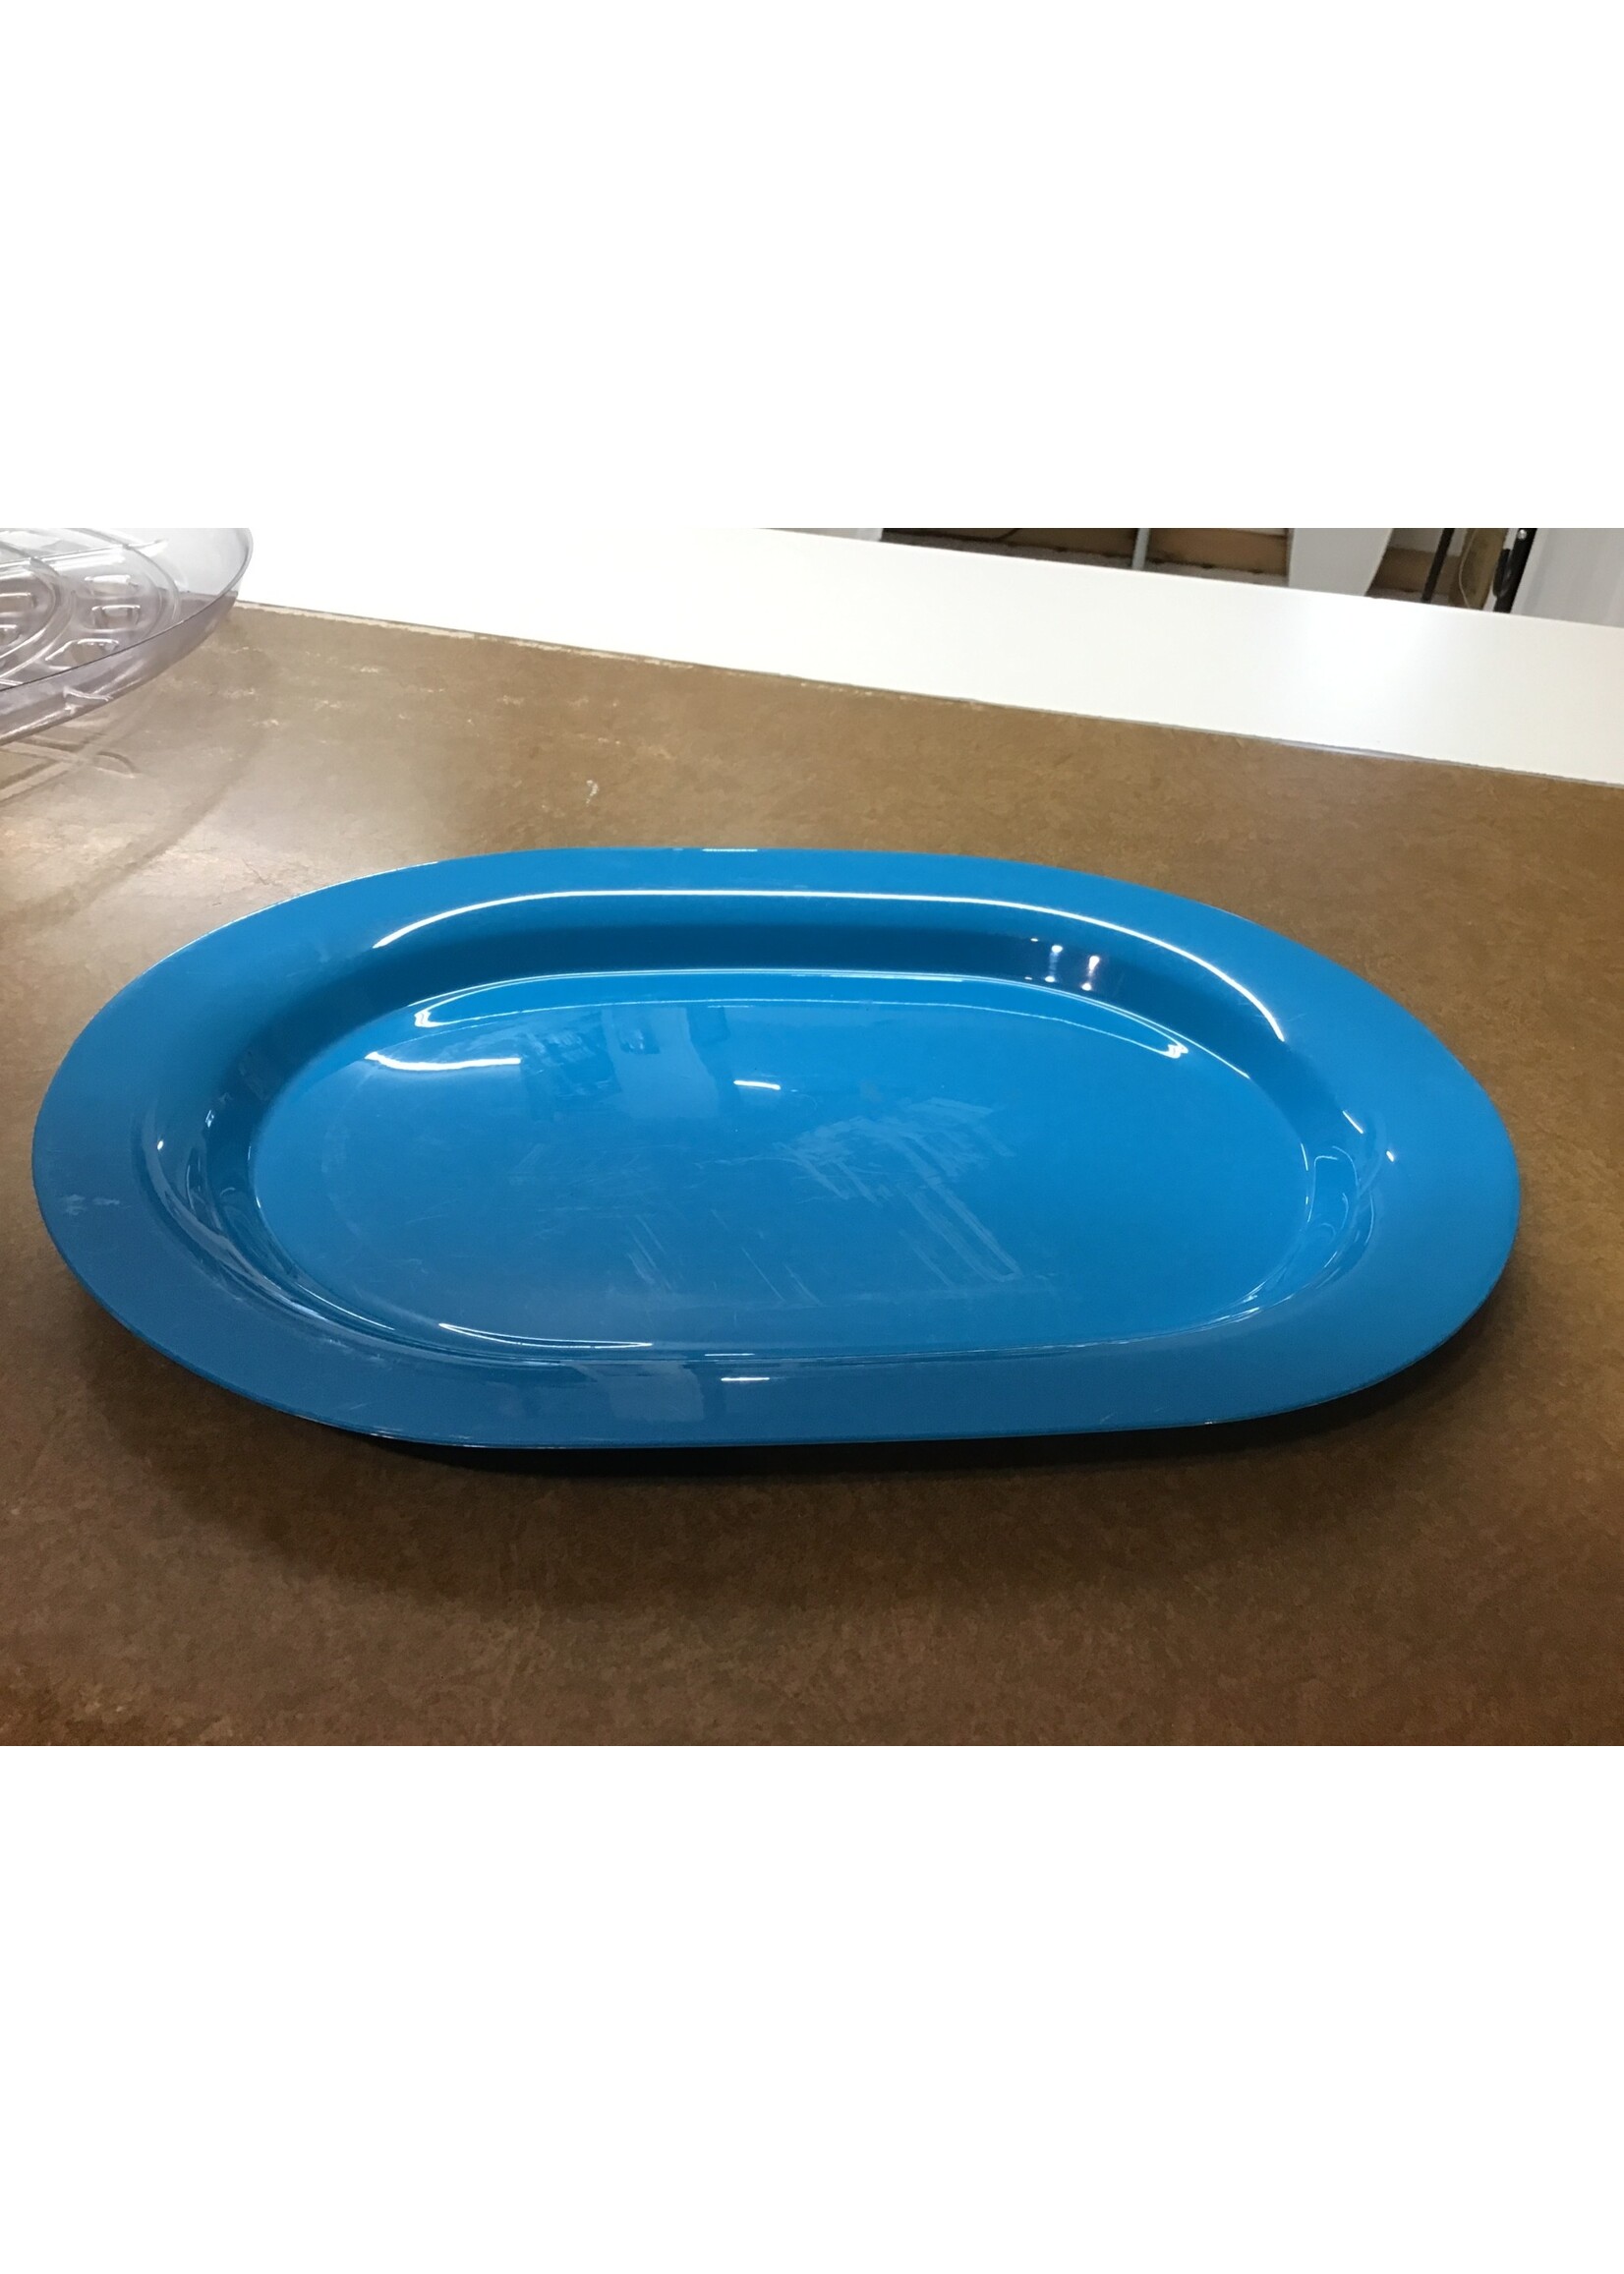 *some scuff marks* Blue oval platter 15.5 x 11.375 x 1